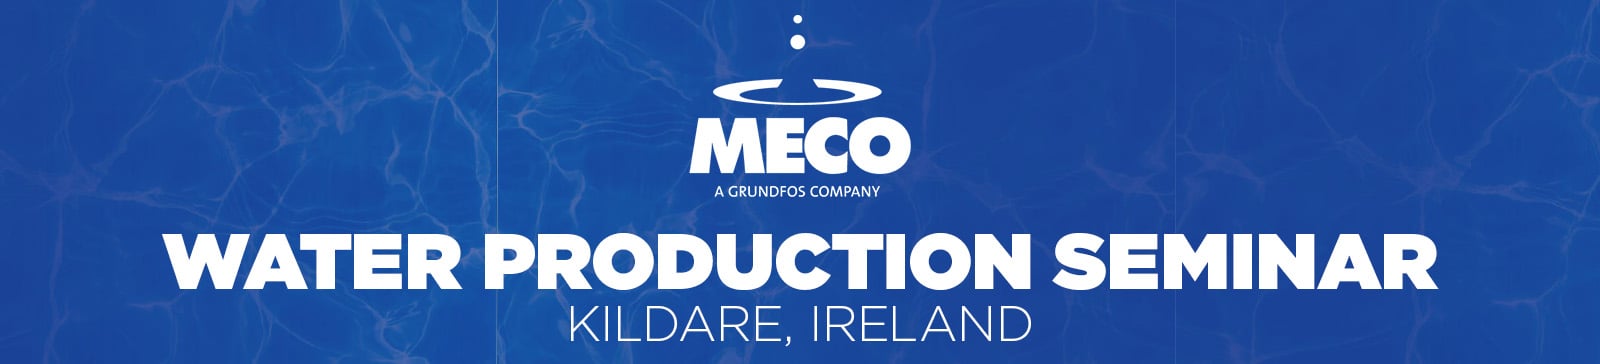 meco ireland semianr form page header